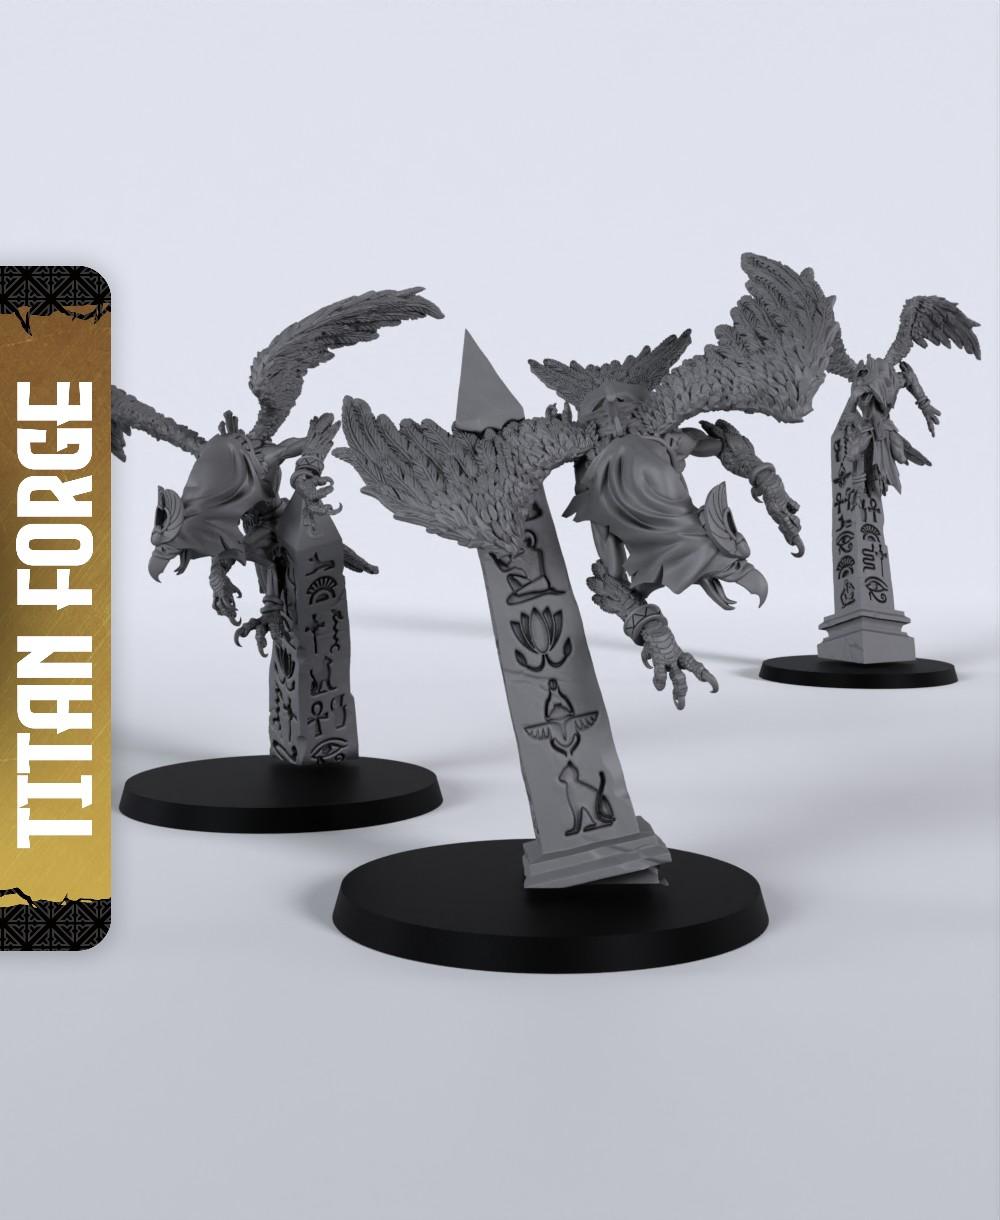 Vultures - With Free Dragon Warhammer - 5e DnD Inspired for RPG and Wargamers 3d model